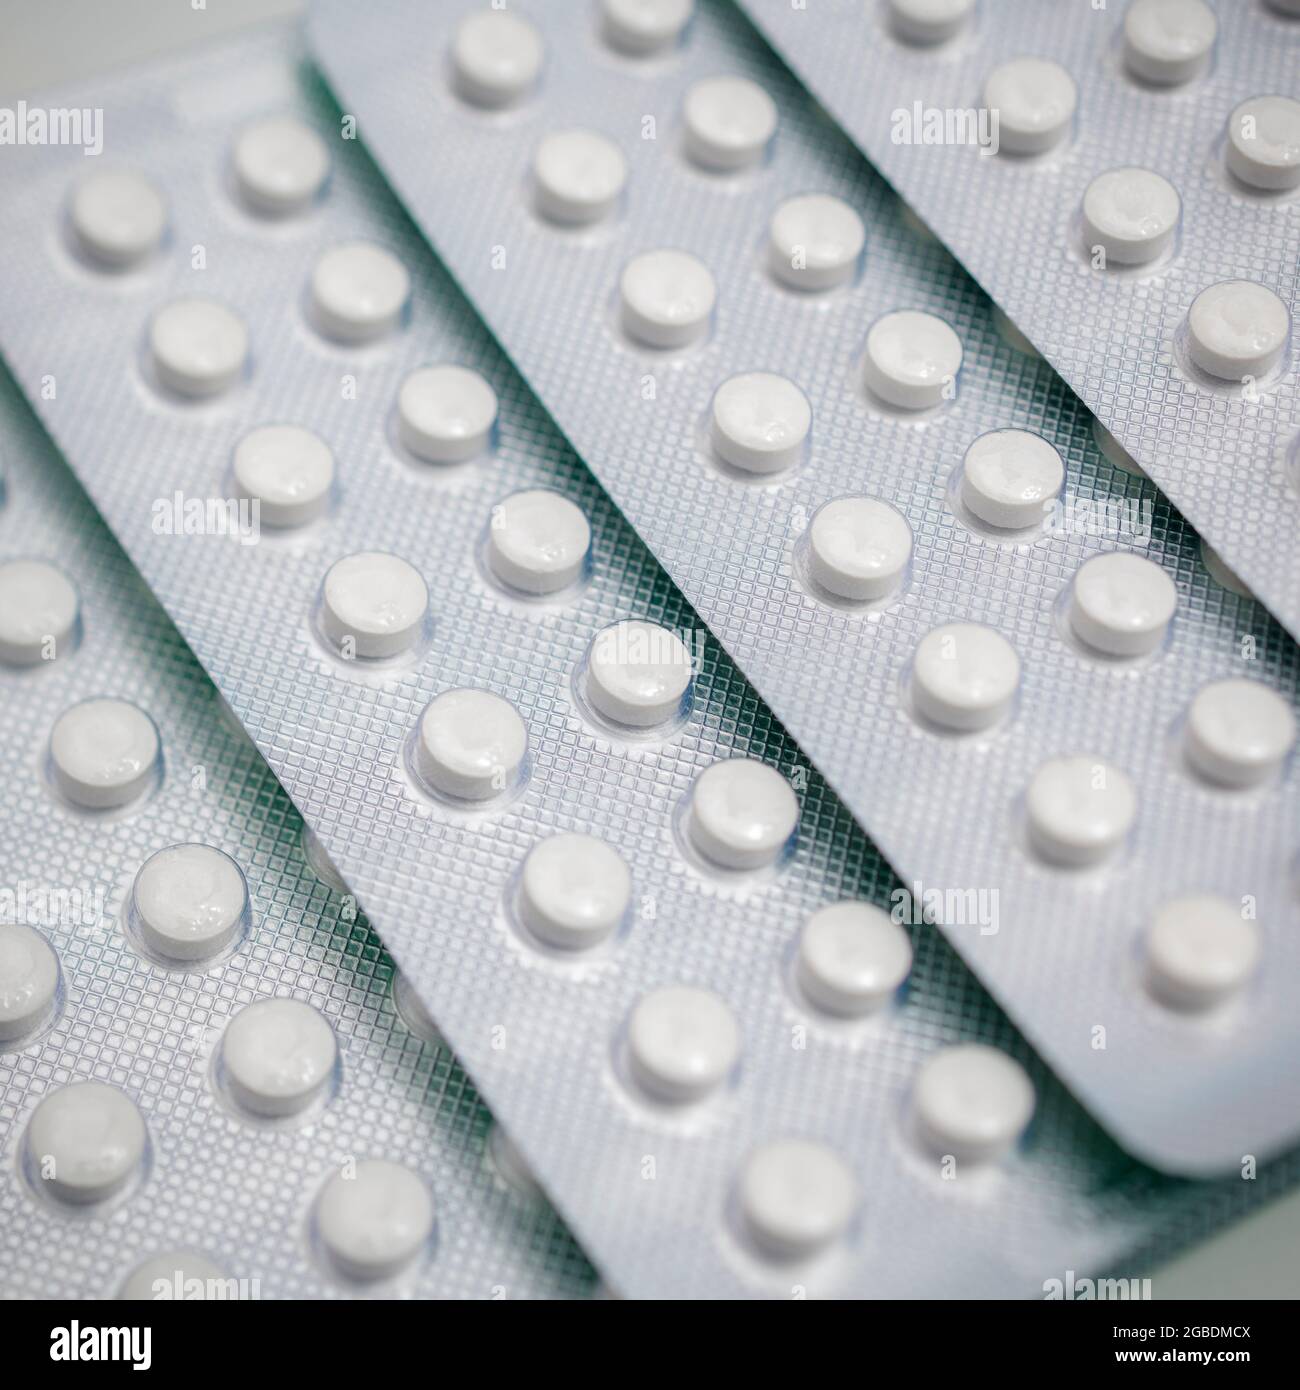 Stylised Square Shot Of Round Vitamin D 3 Pills Made By Uk Neutraceuticals Company Vitabiotics Ltd Example Of Blister Packaging Health Supplements Stock Photo Alamy